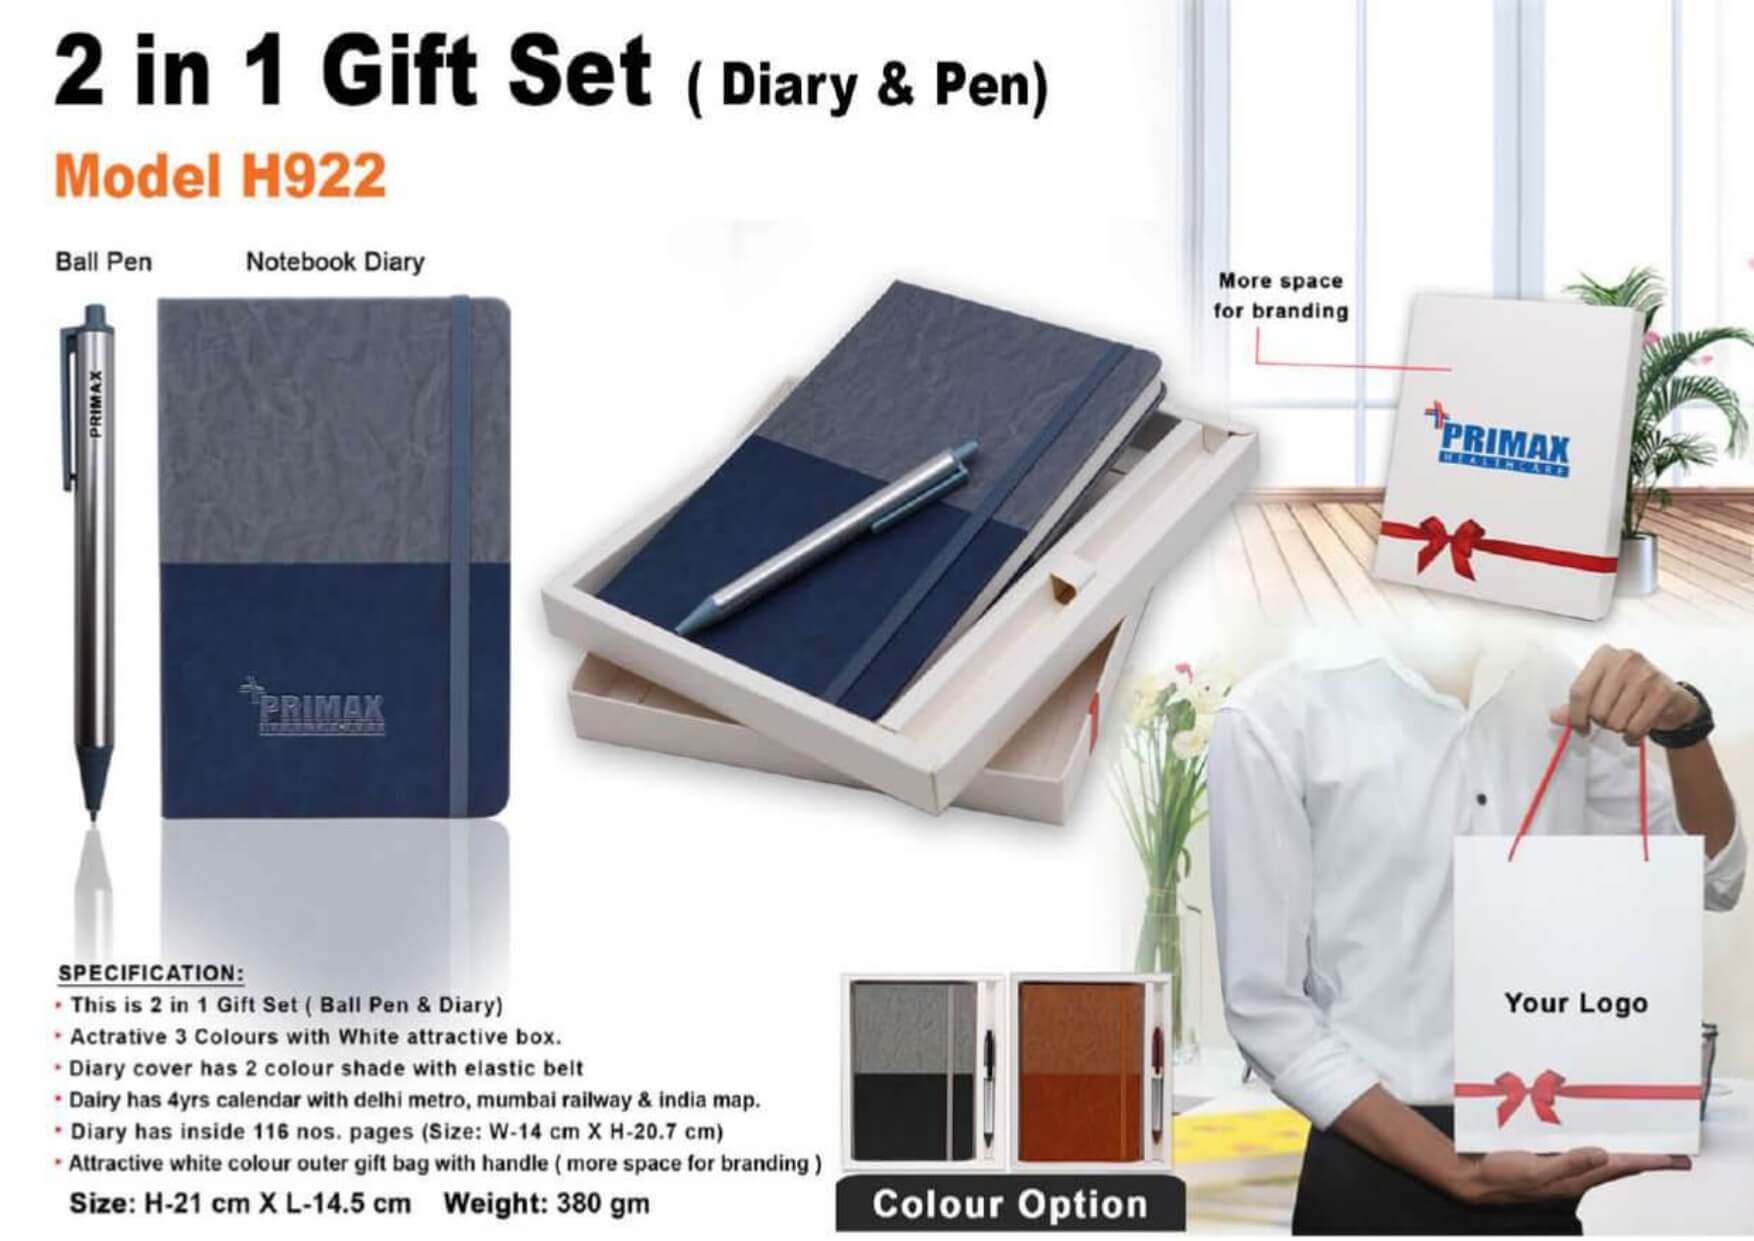 Diary and Pen 2 in 1 Gift Set 922